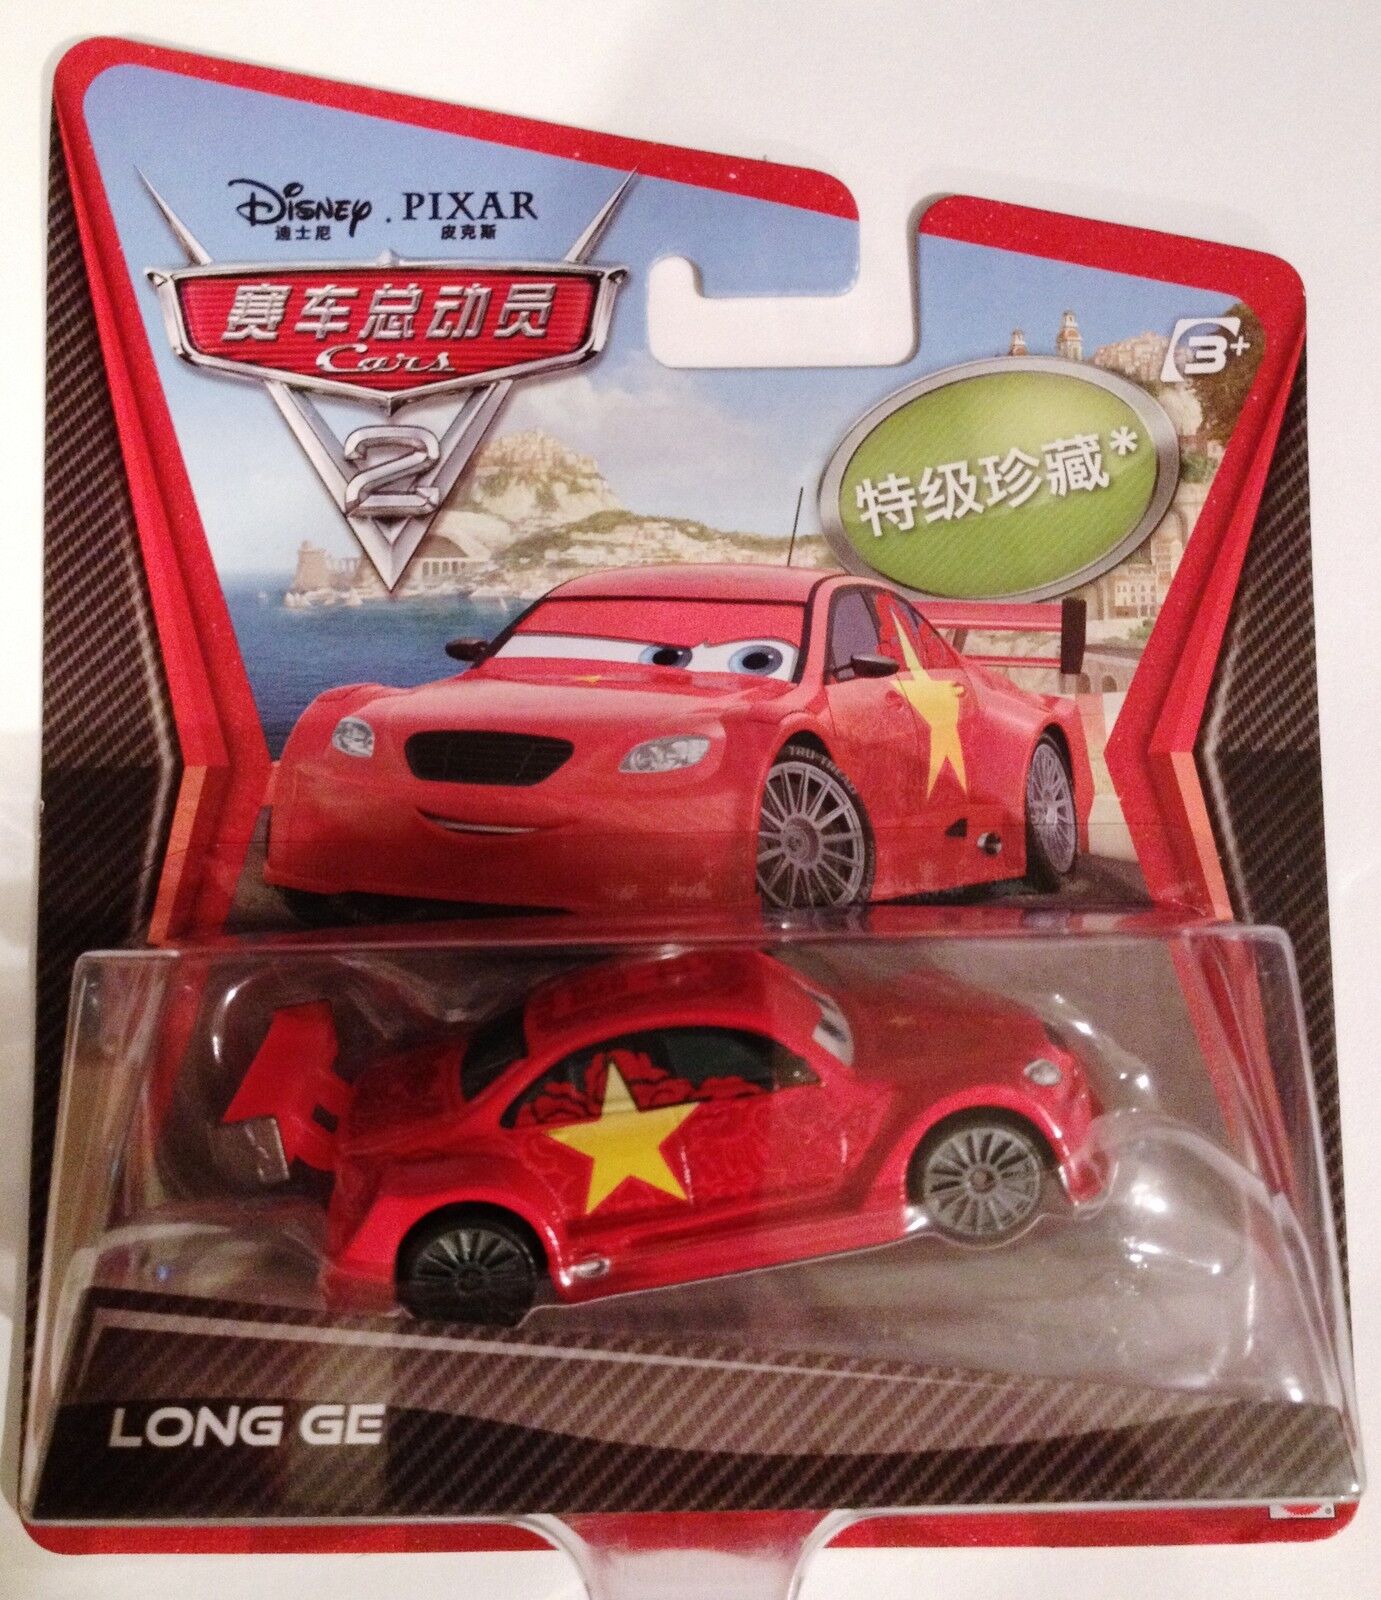 DISNEY / PIXAR MOVIE CARS 2 - LONG GE Limited SUPER CHASE 1:55 Scale - 4000 Made